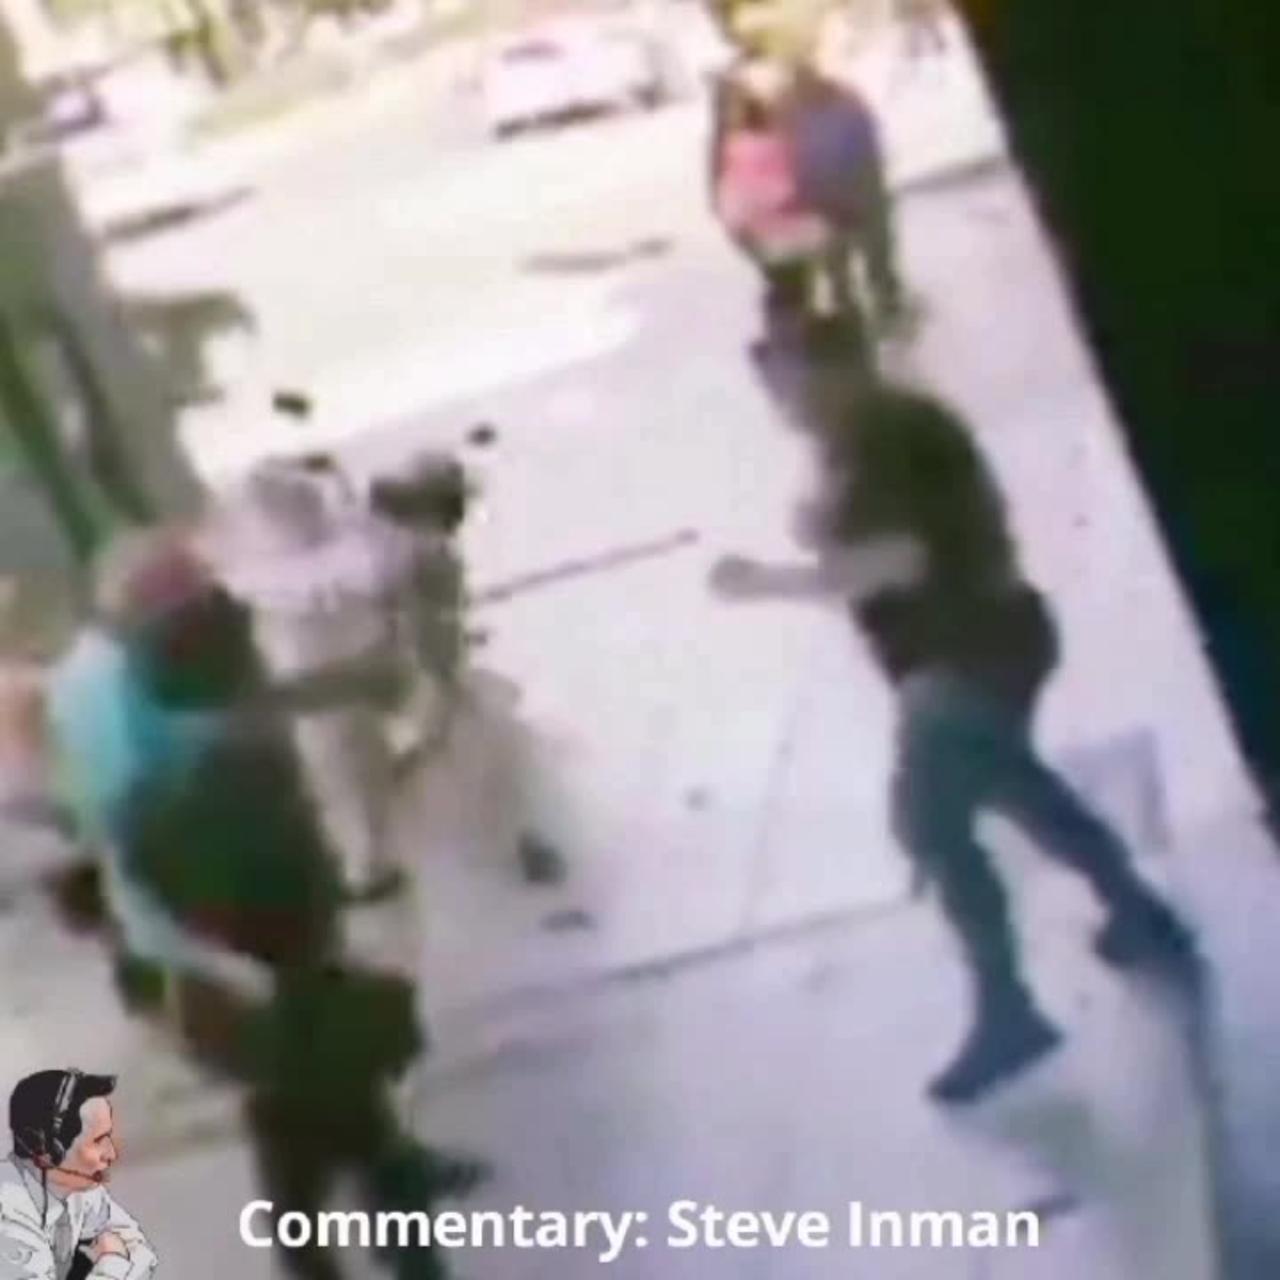 Coward beats on an old man then takes a beating in return.